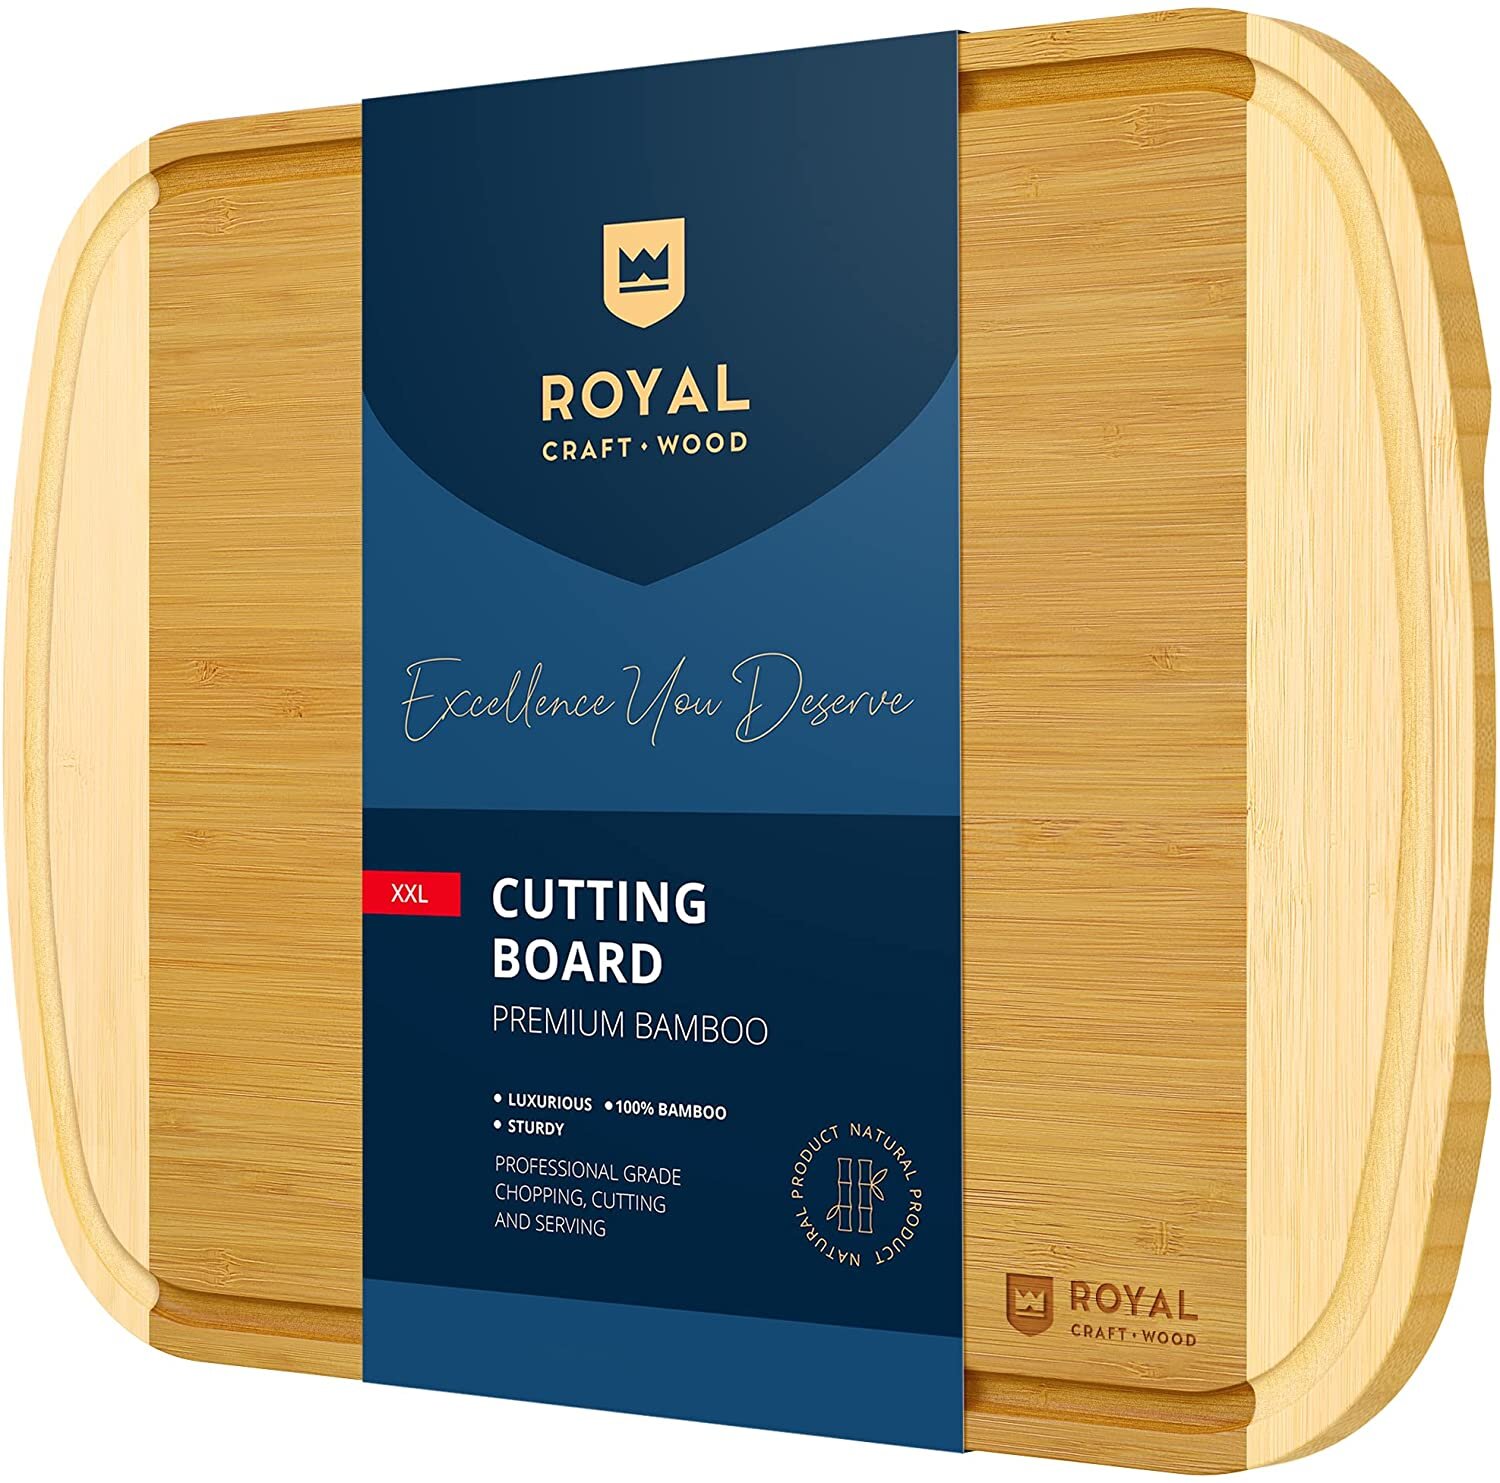 Extra Large Bamboo Cutting Board for Kitchen - Largest Wooden Butcher Block  for Turkey, Meat, Vegetables, BBQ - 30 x 20 Inch - Over the Sink Chopping